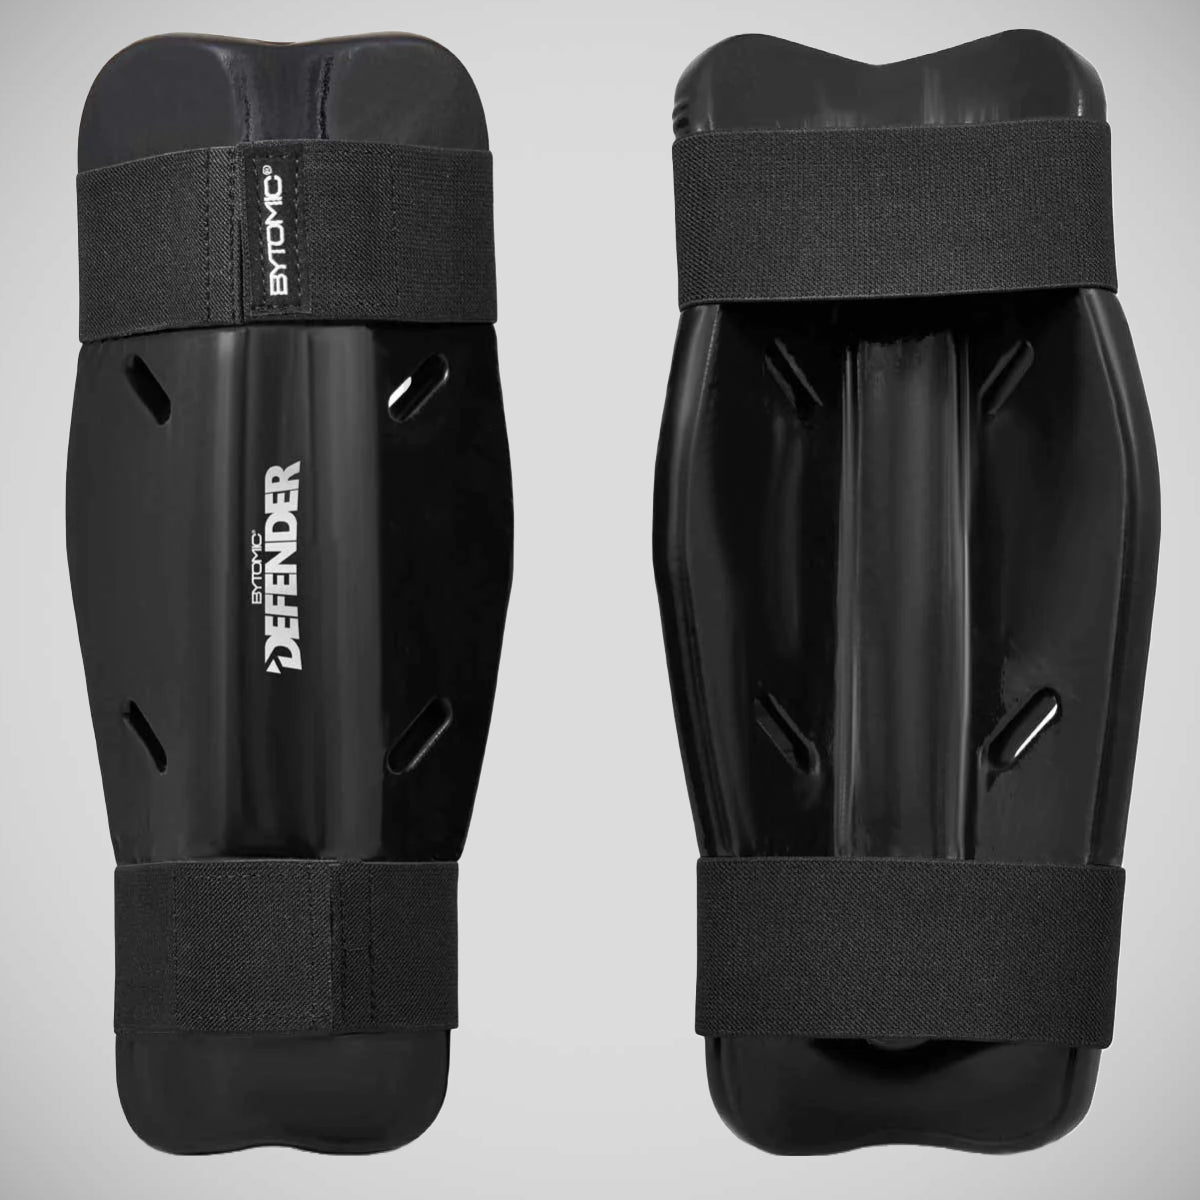 Black Bytomic Defender Shin Guard from Made4Fighters